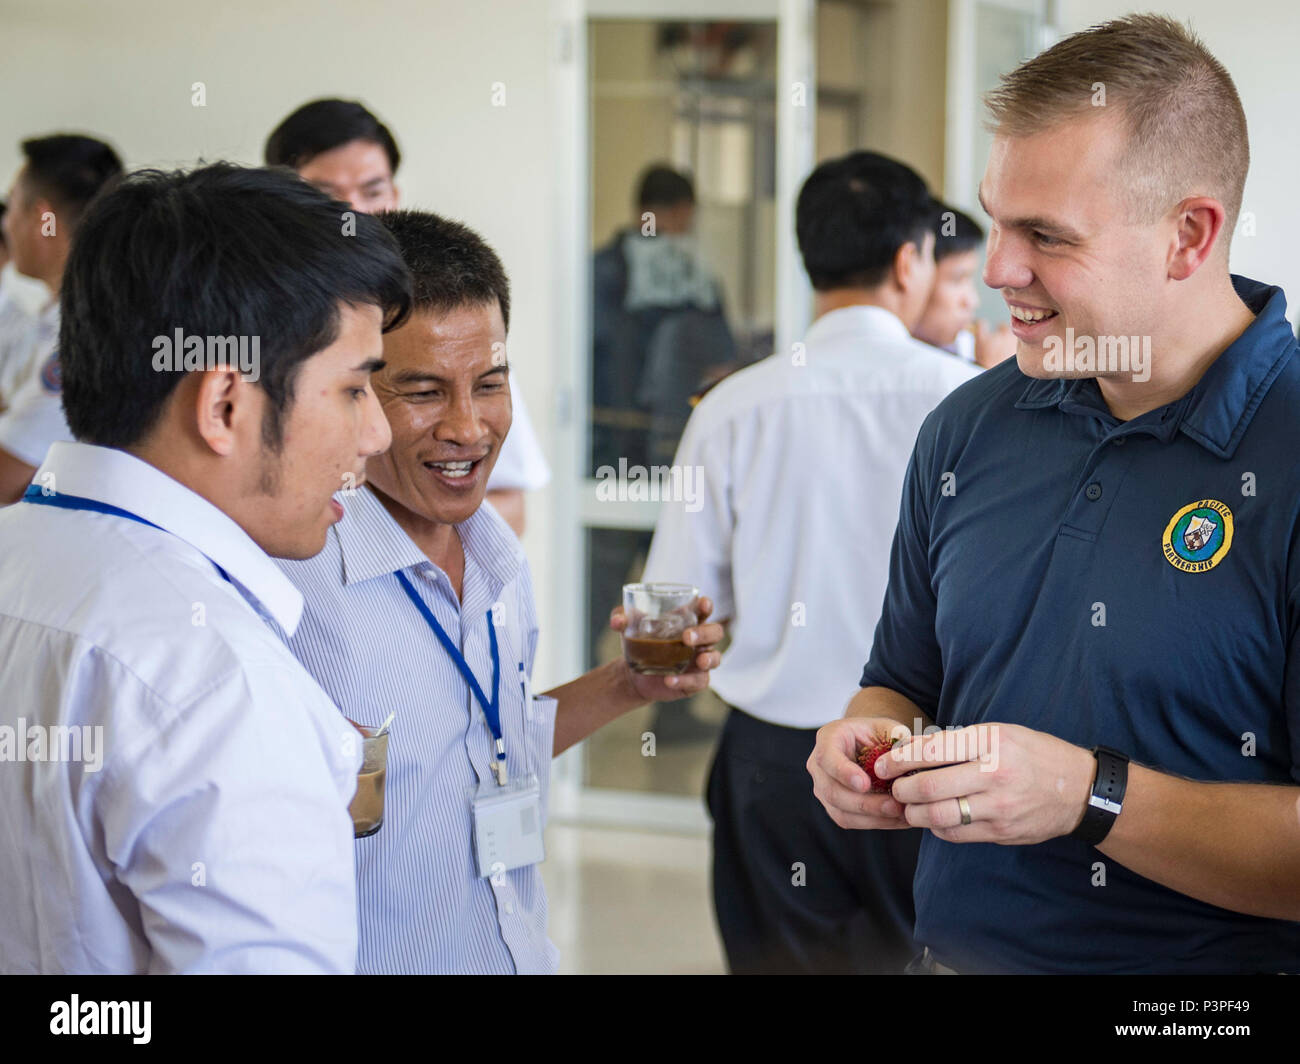 160722-N-QW941-166 DA NANG, Vietnam (July 22, 2016) Lt. Steven Whelpley, an emergency physician assigned to hospital ship USNS Mercy (T-AH 19) and native of Fredericksburg, Virginia interacts with local physicians at Da Nang 115 Emergency Center during a humanitarian and disaster response subject matter expert exchange. During the exchange, Pacific Partnership 2016 participants discussed multi service approaches to mass casualties and injury management sustained at sea. Mercy is joined in Da Nang by JS Shimokita (LST-4002) and Vietnam People's Navy ship Khánh Hóa for Pacific Partnership. Partn Stock Photo